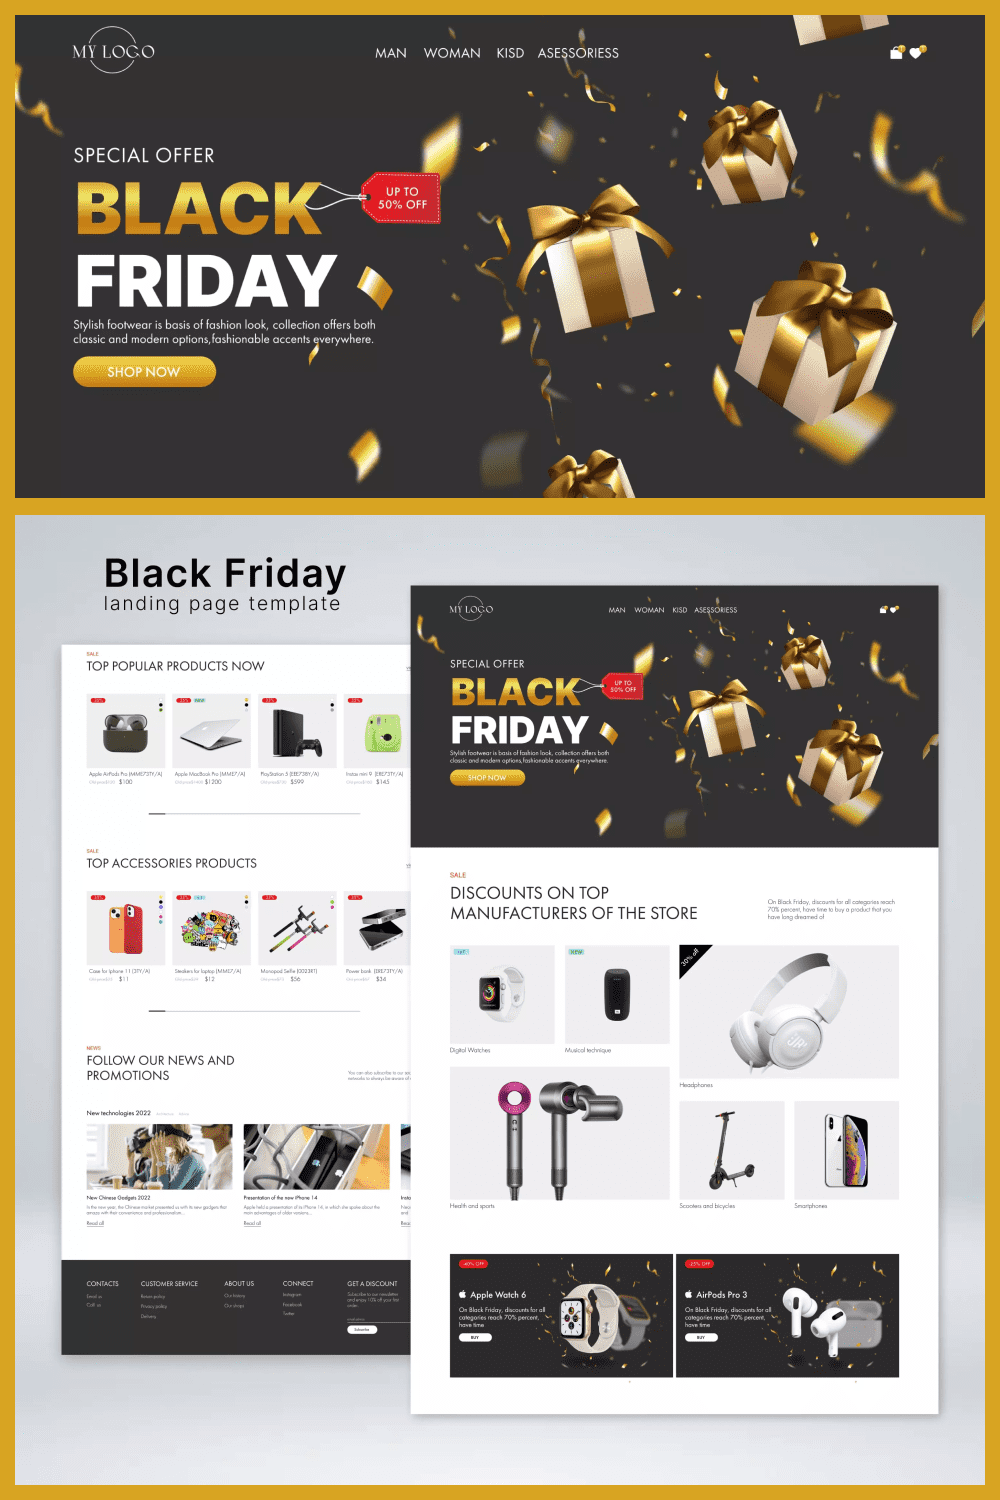 Collage of landing page screenshots with black and white elements.